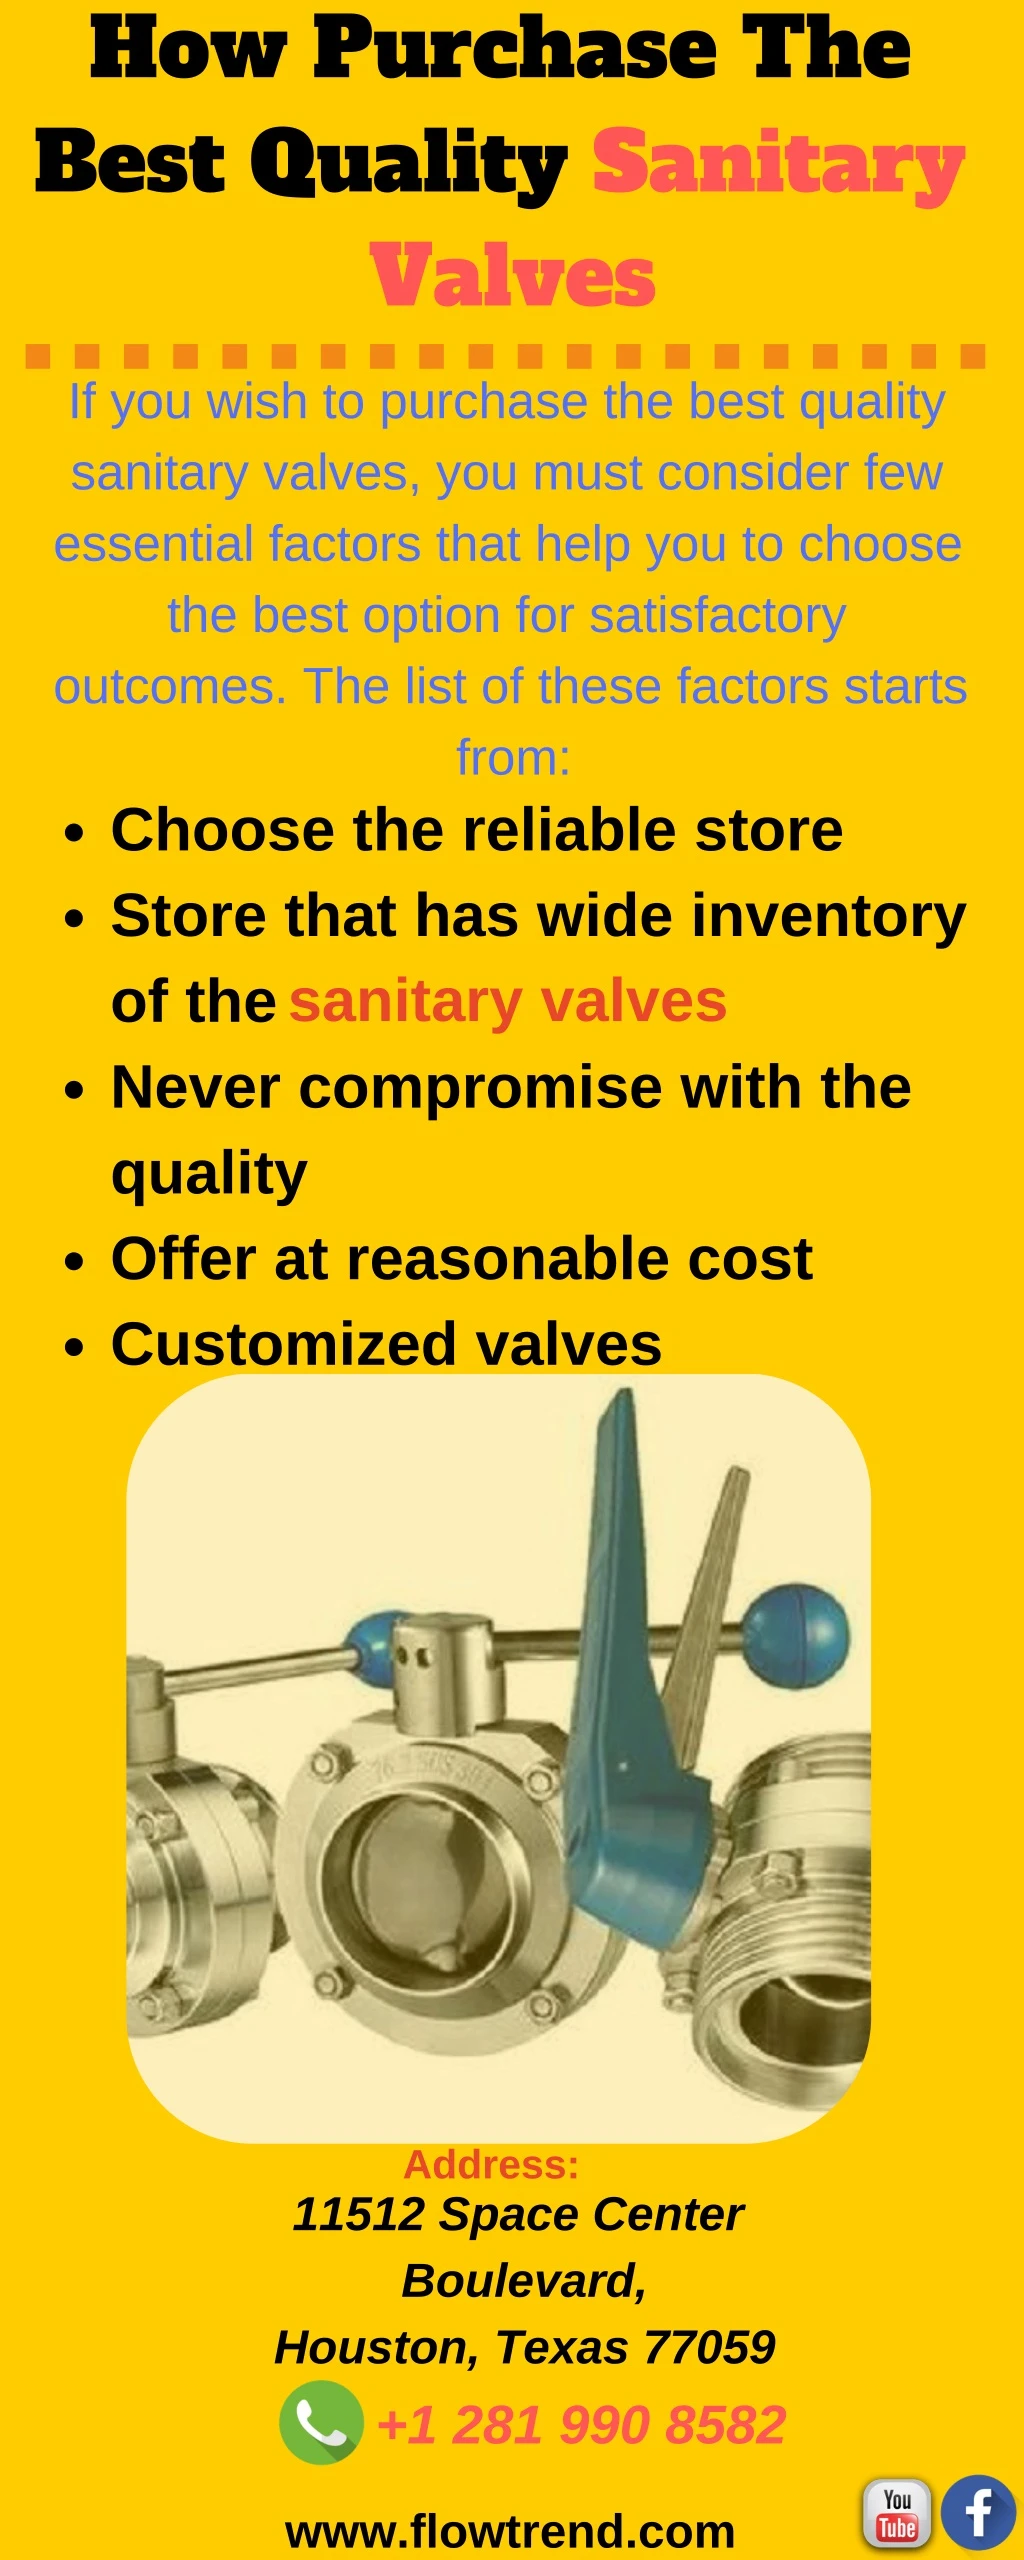 how purchase the best quality sanitary valves